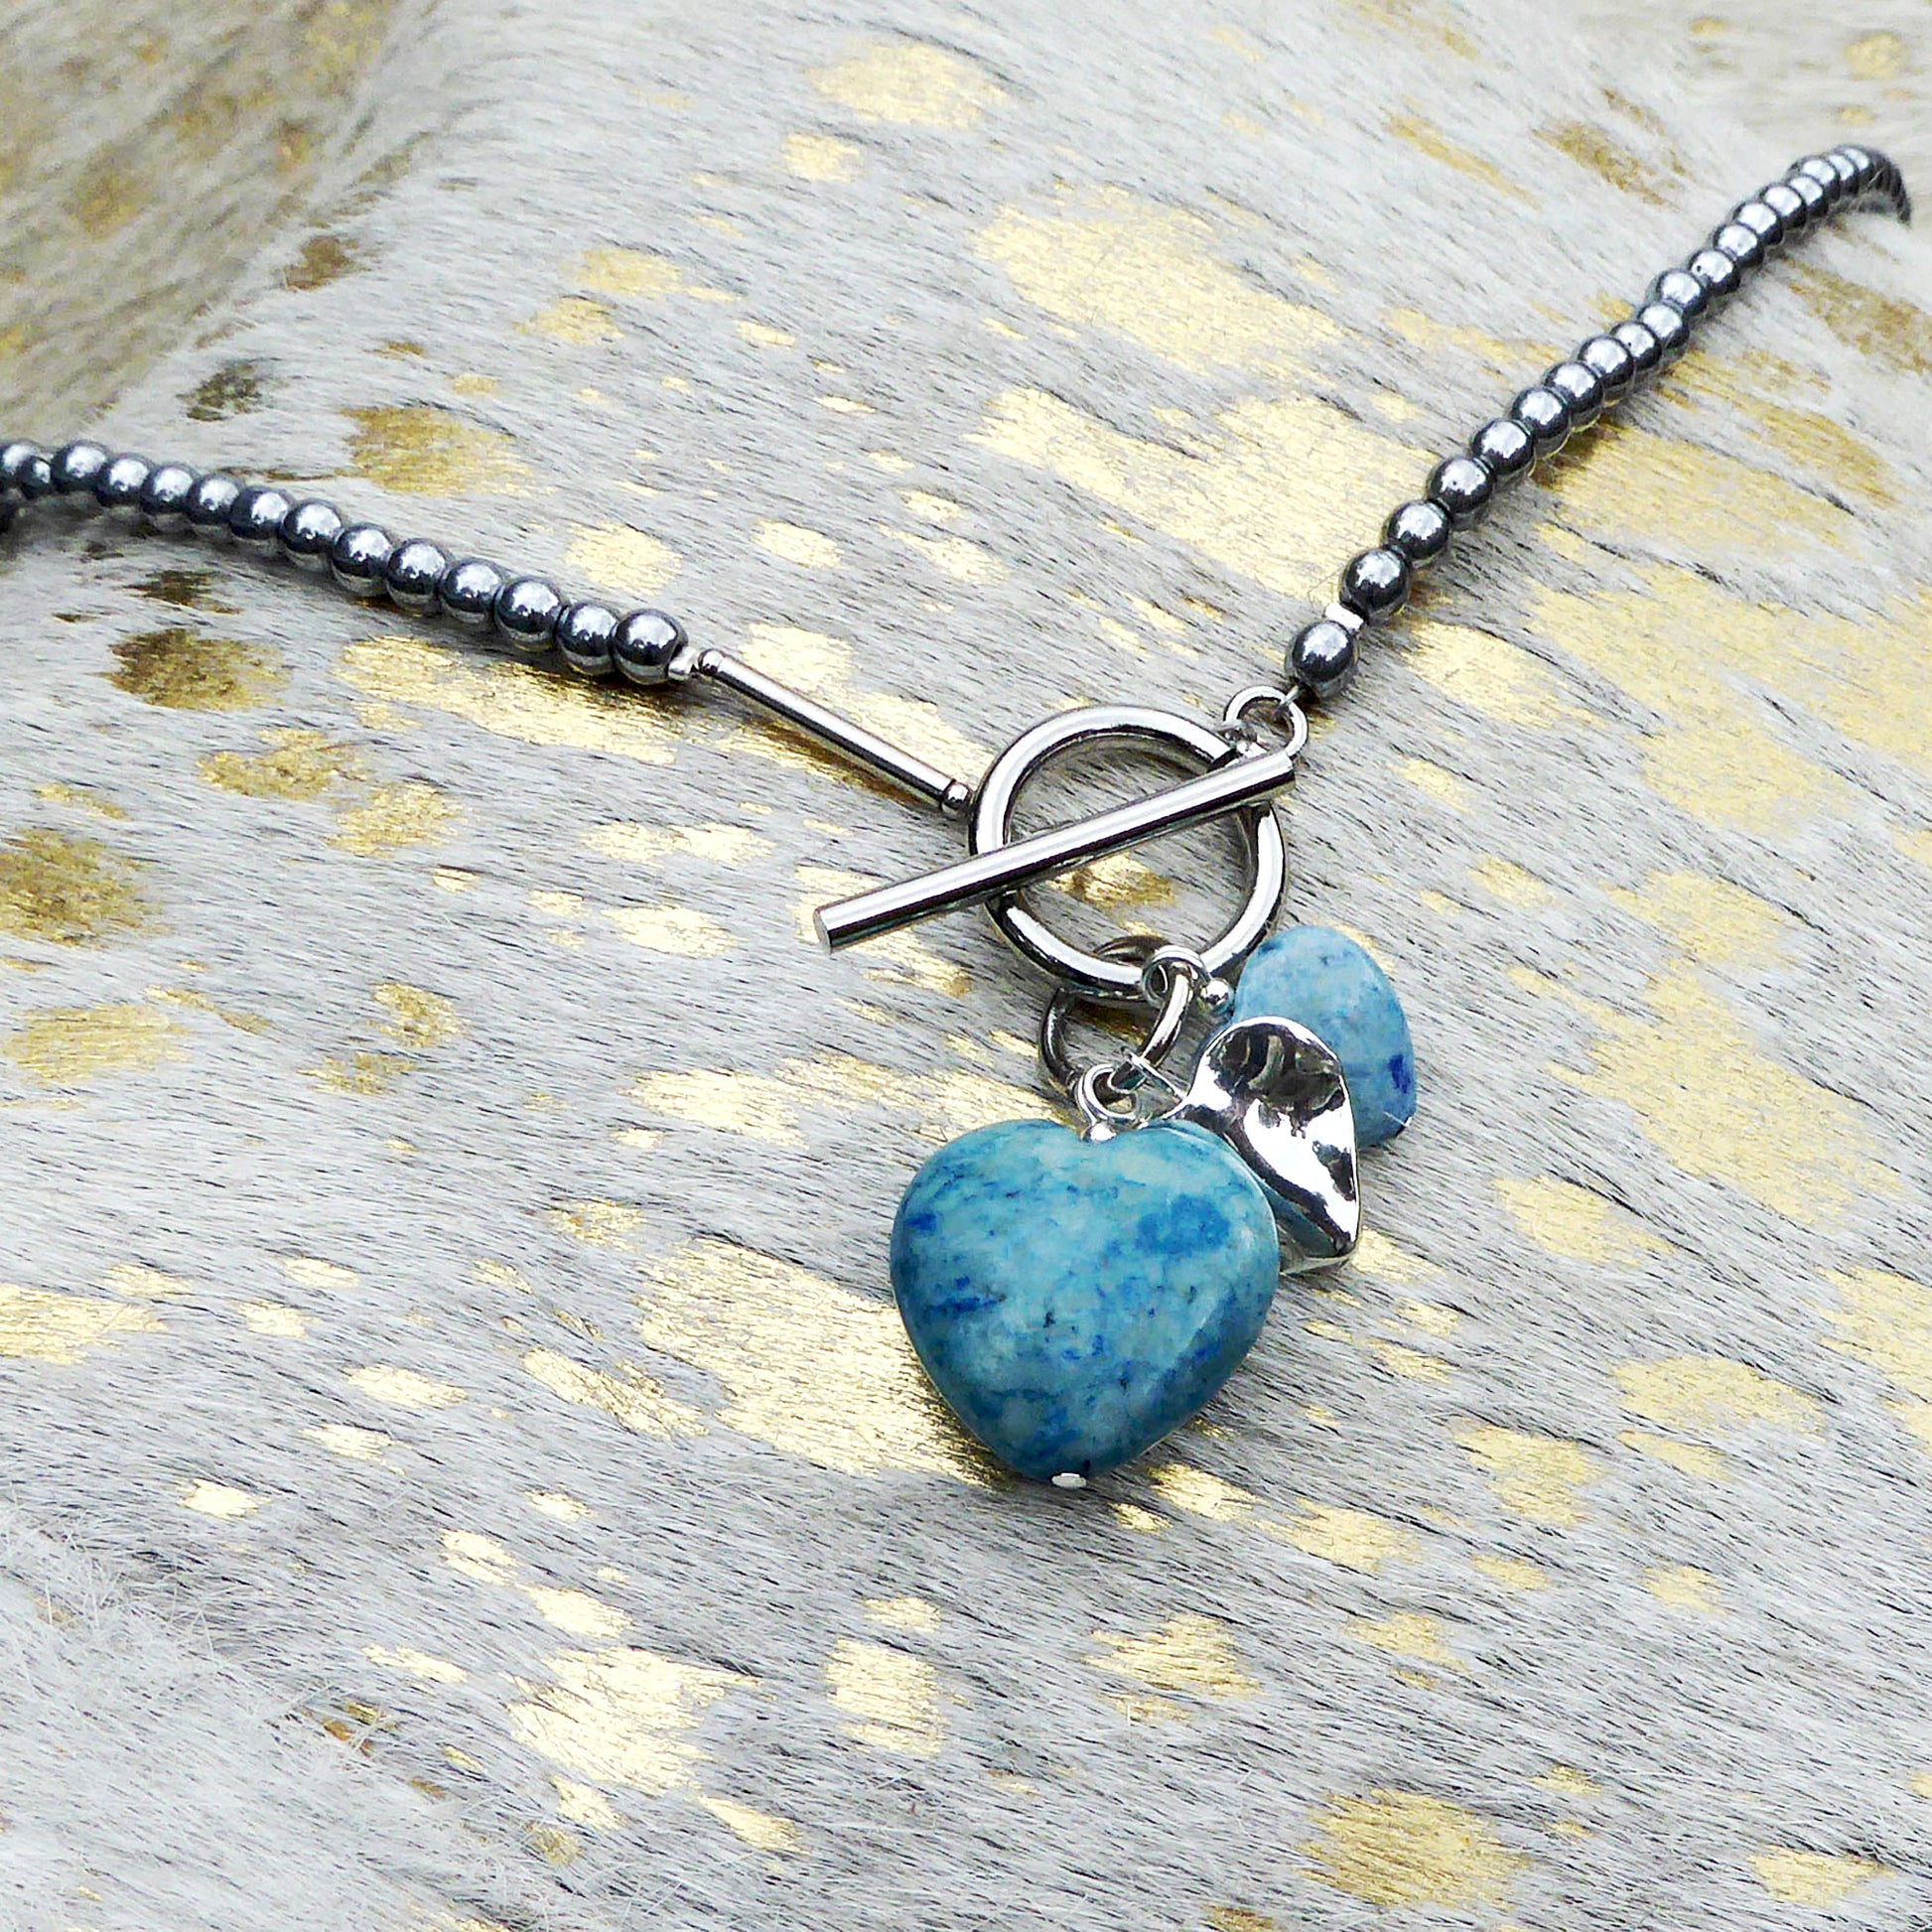 Blue fossil stone charms necklace